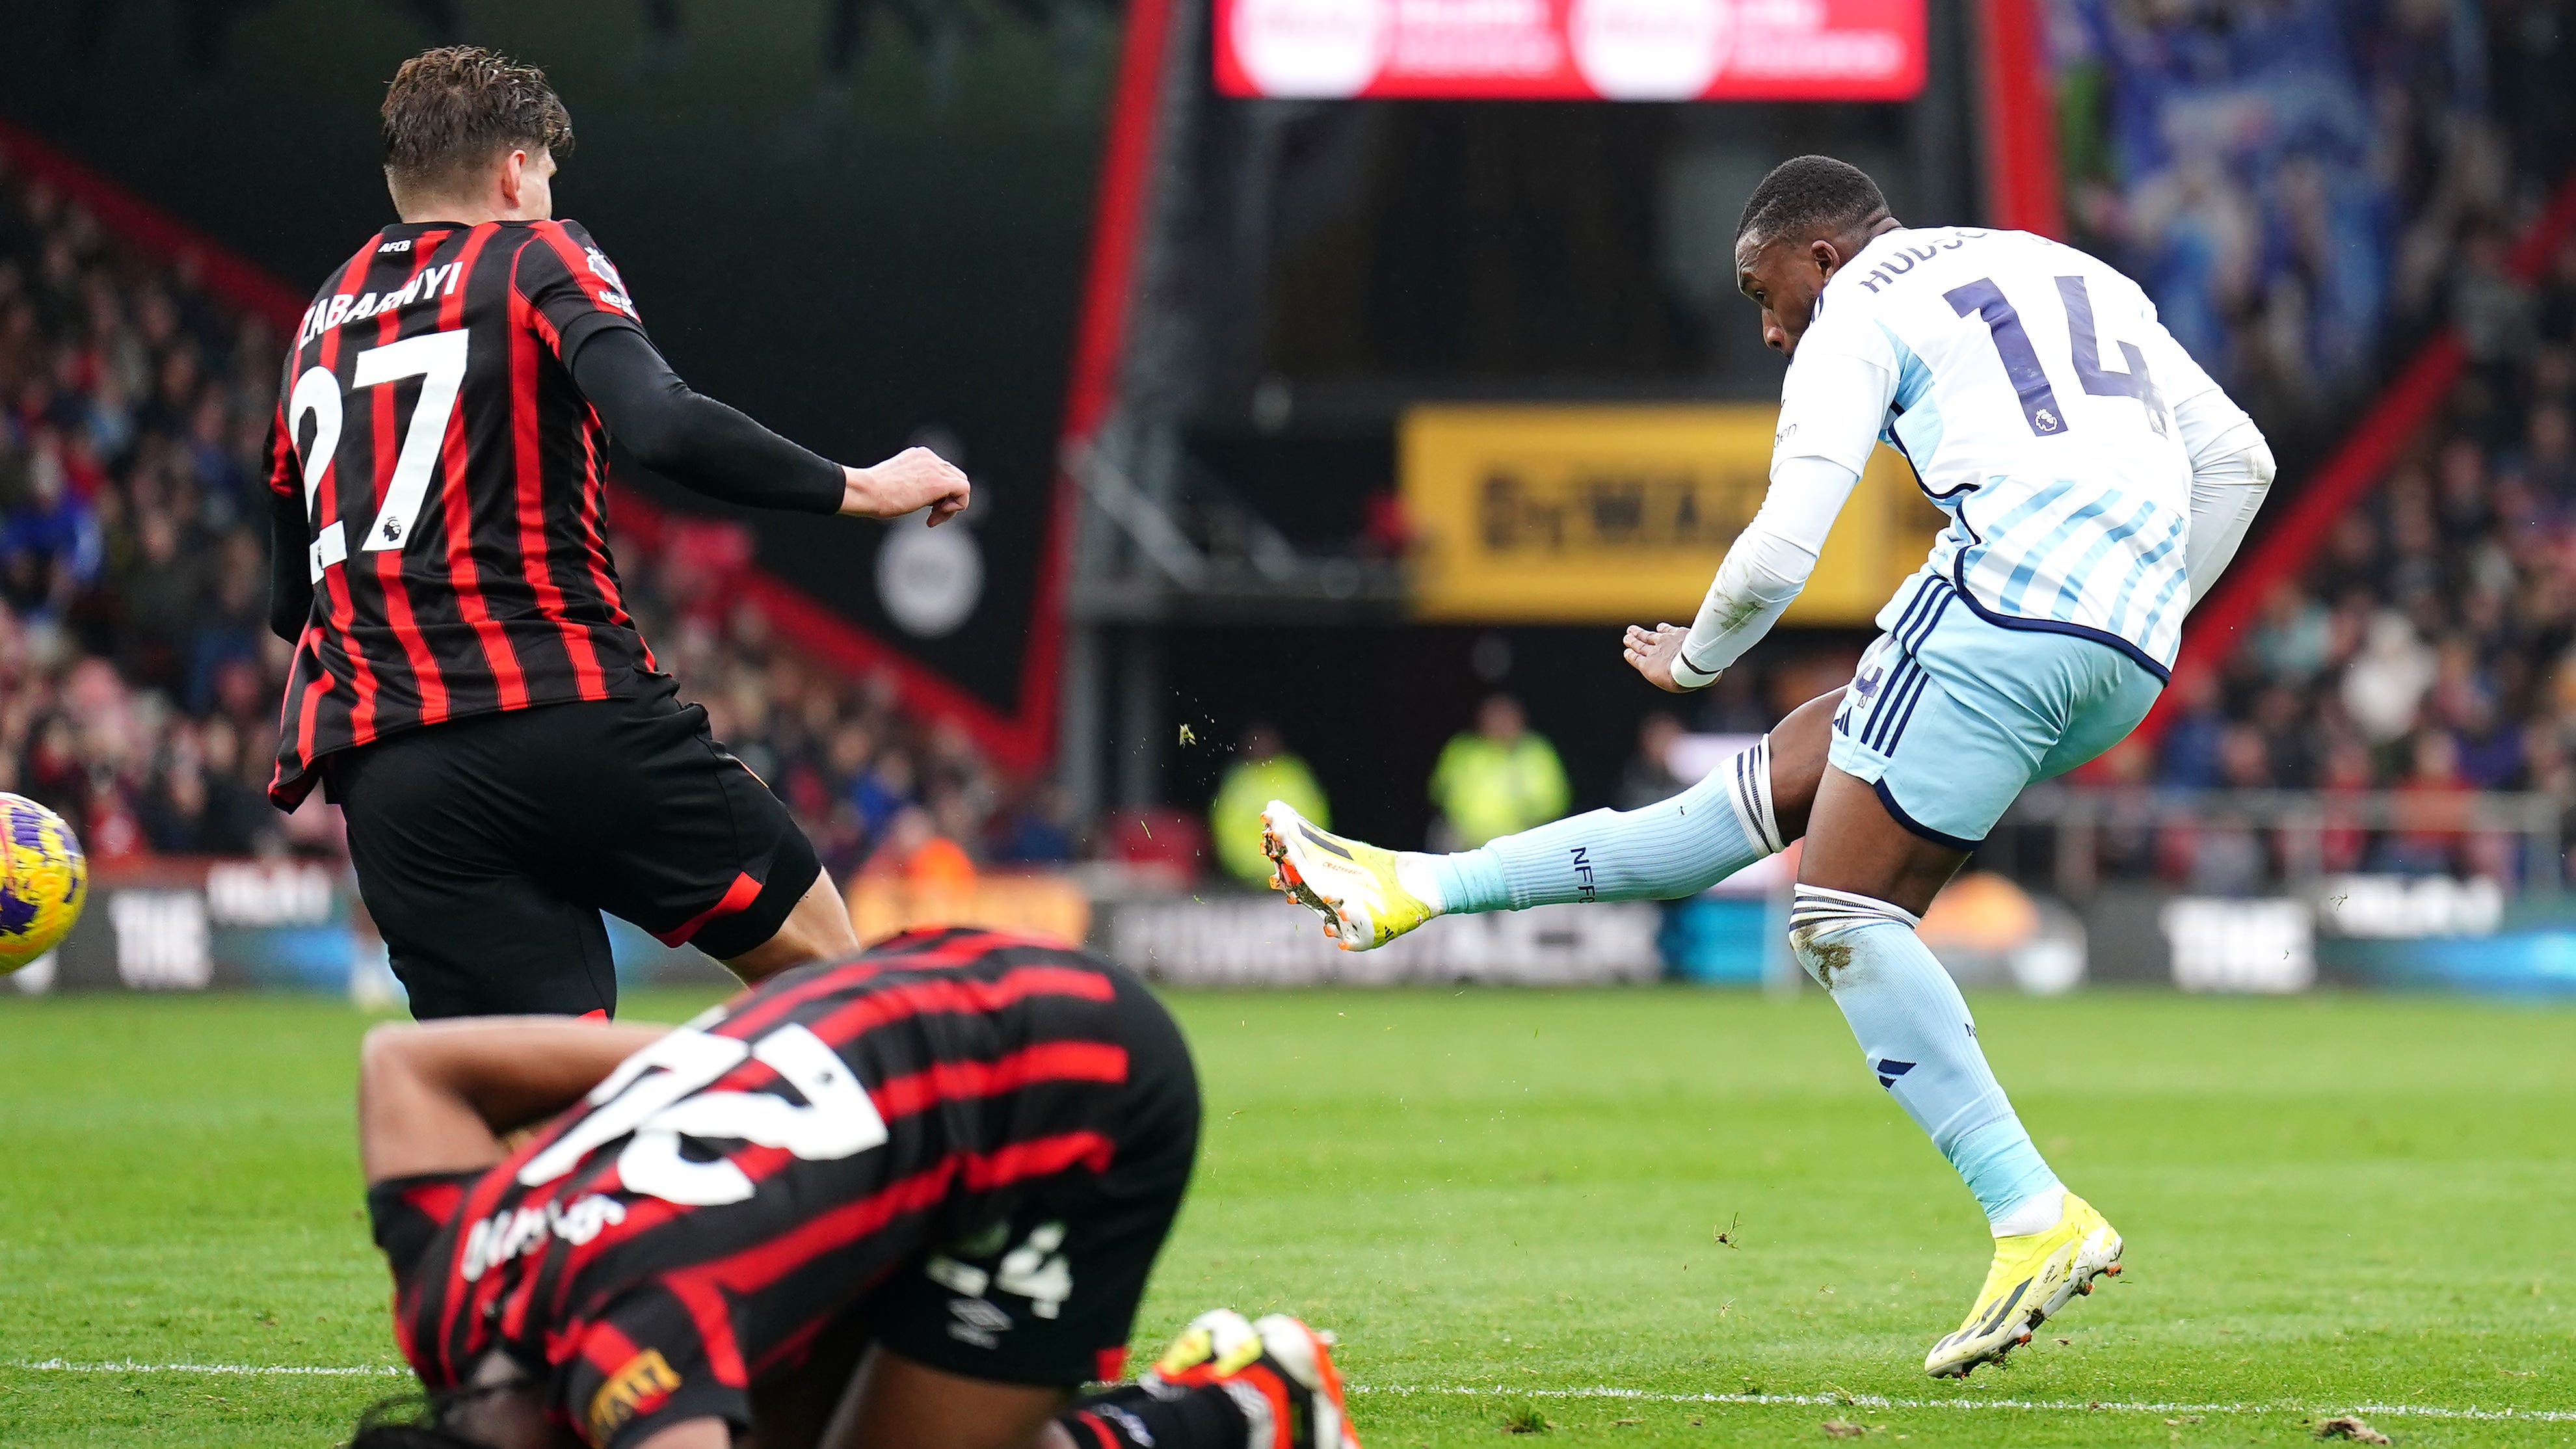 Callum Hudson-Odoi earns much-needed Forest point in draw at 10-man Bournemouth